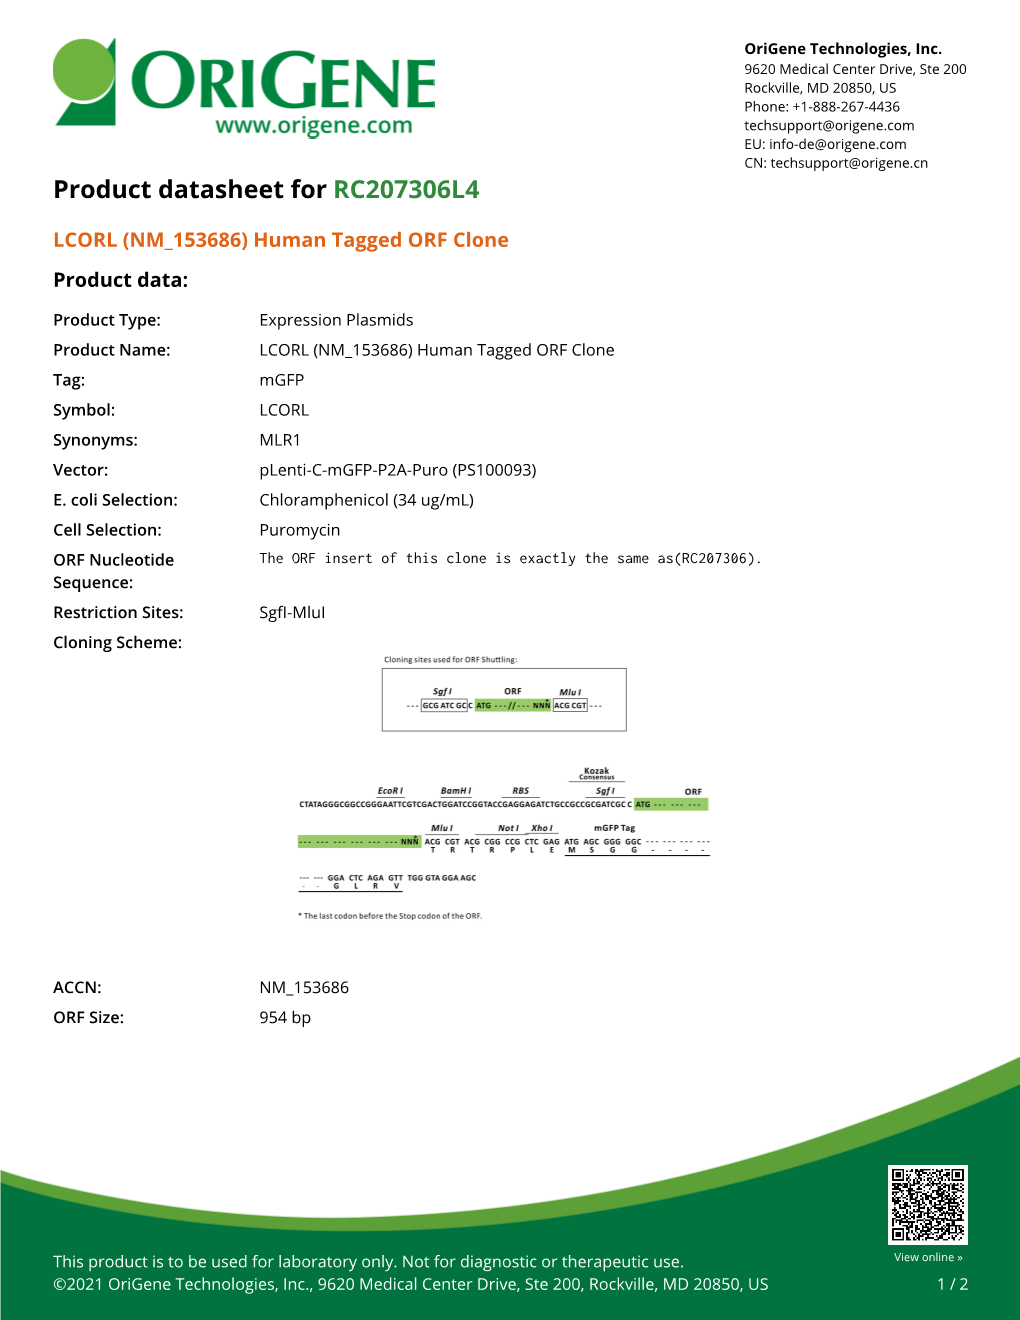 LCORL (NM 153686) Human Tagged ORF Clone Product Data